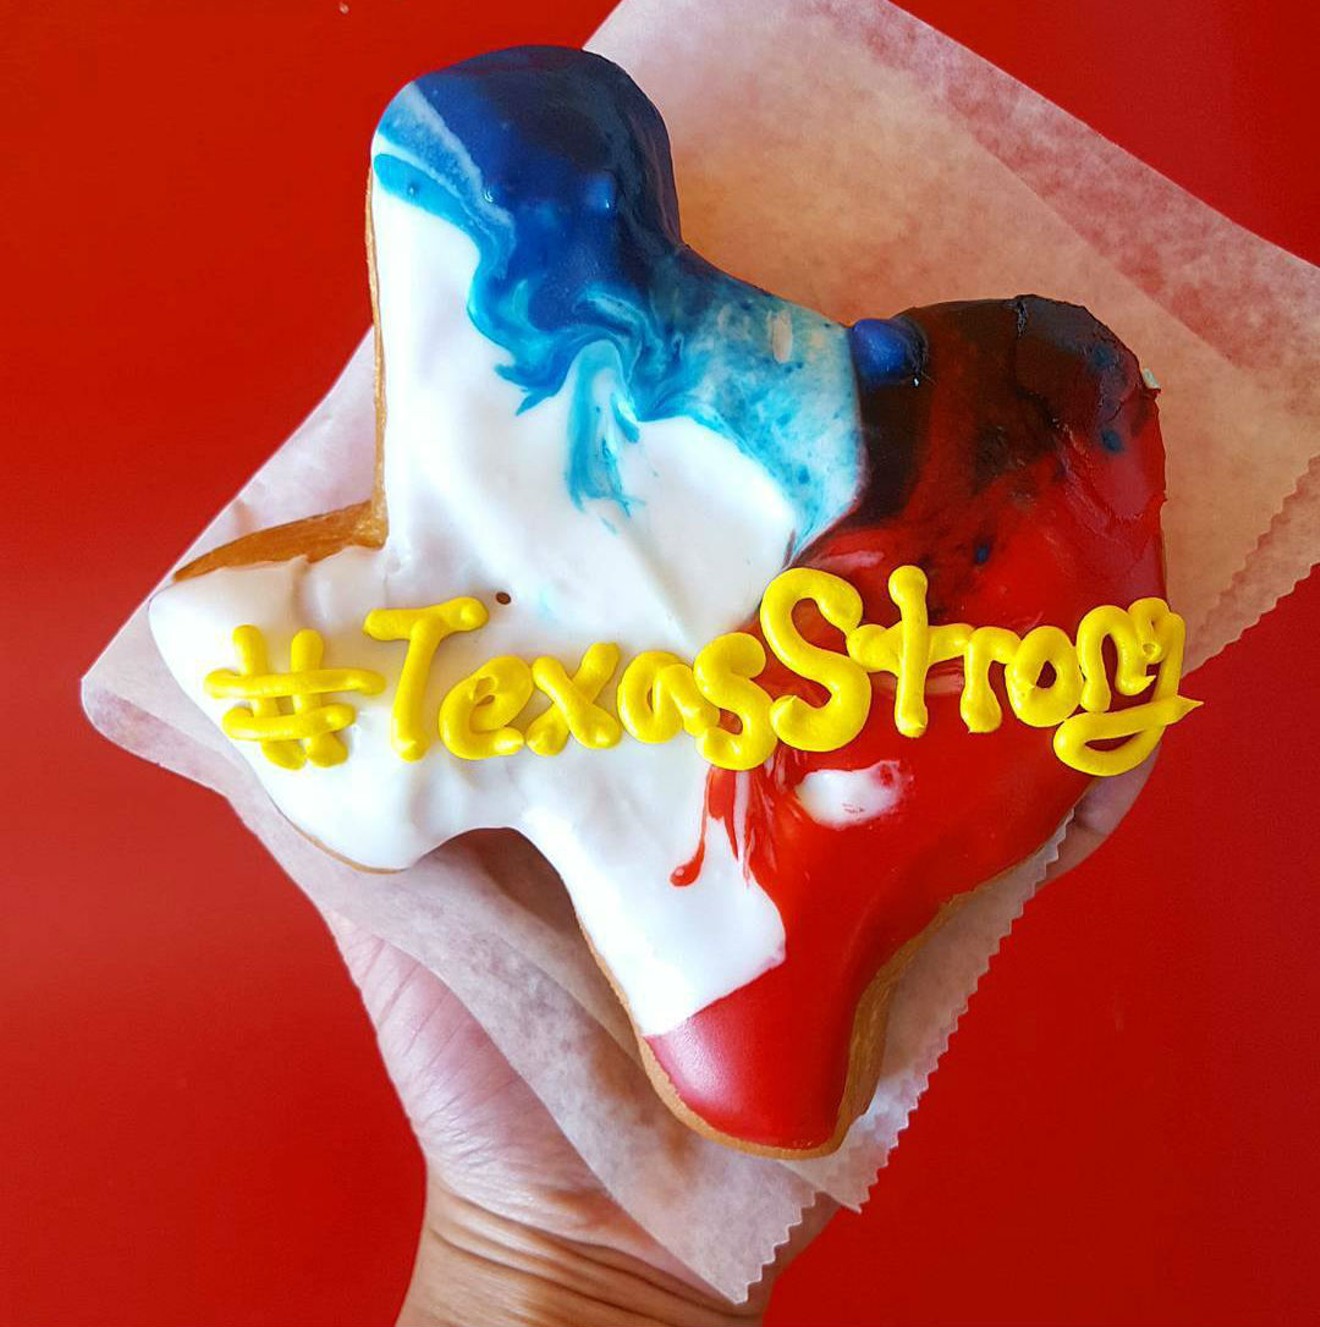 Jarams Donuts is donating all proceeds from its sales of "Texas strong" doughnuts to the American Red Cross in Houston.